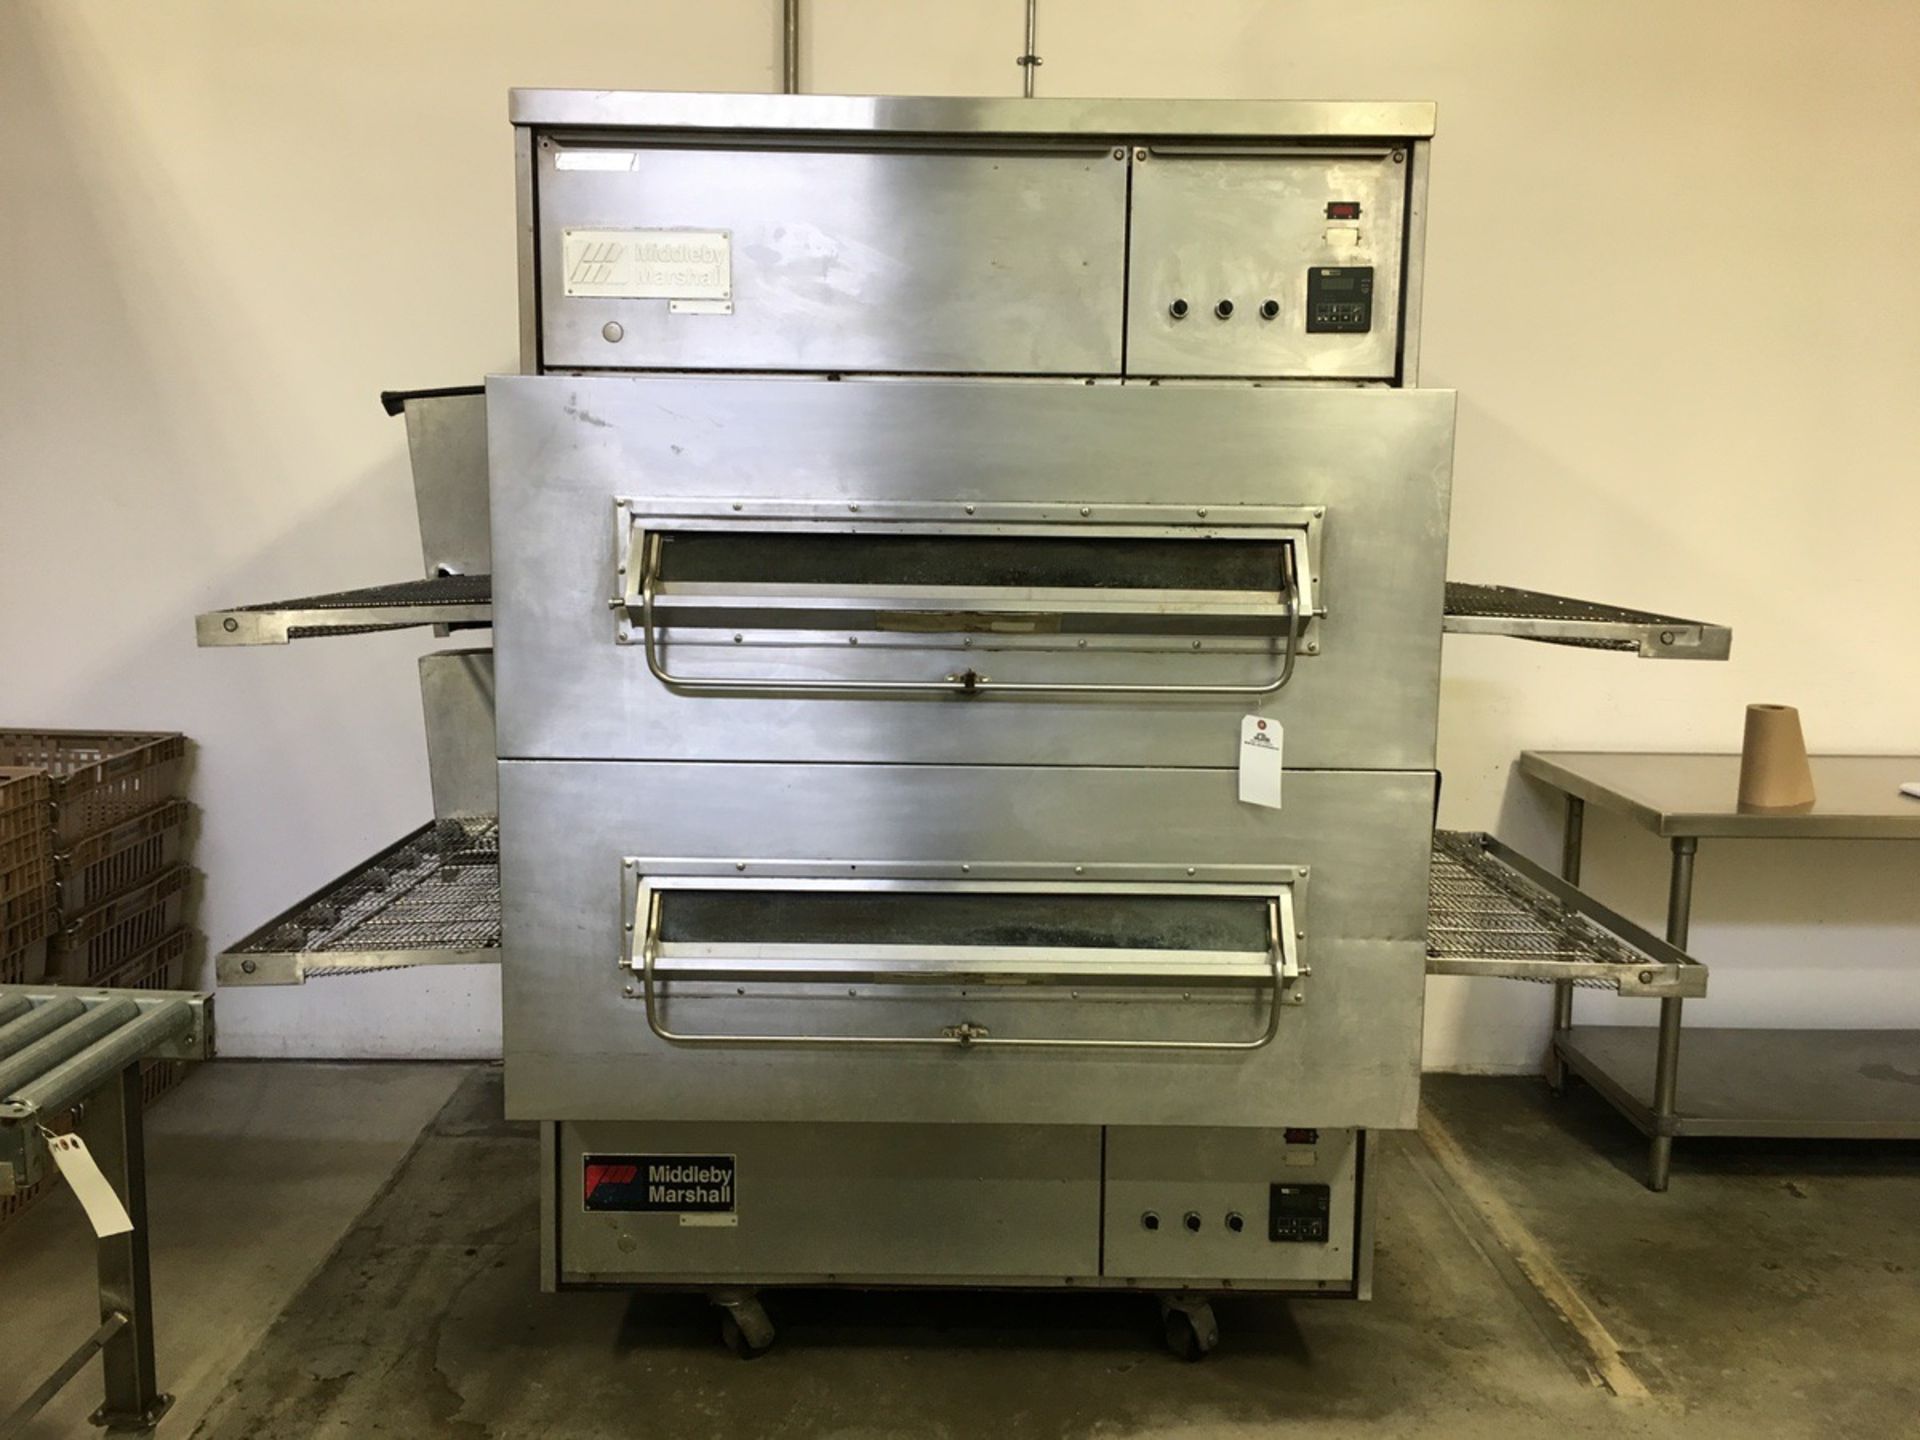 Middleby Marshall Double Rack Oven, Each Rack Approx 41in W x 3in Clear | Rig Fee: No Charge - Image 2 of 7